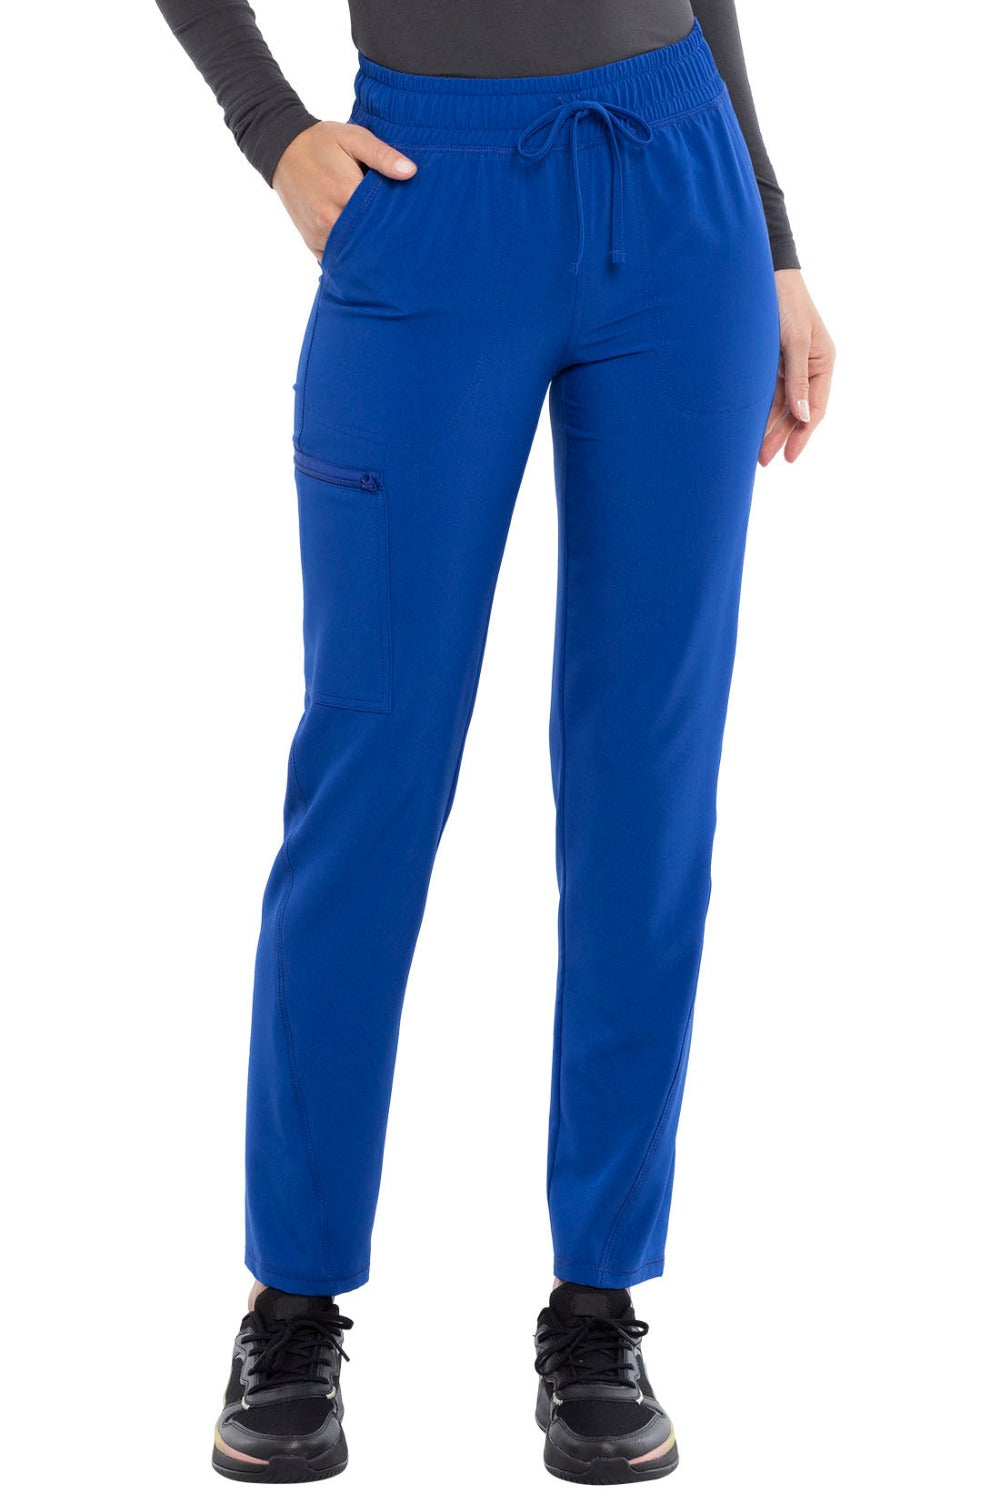 Cherokee Allura Tall Scrub Pant Mid Rise Tapered Leg Drawstring in Galaxy Blue at Parker's Clothing and Shoes.